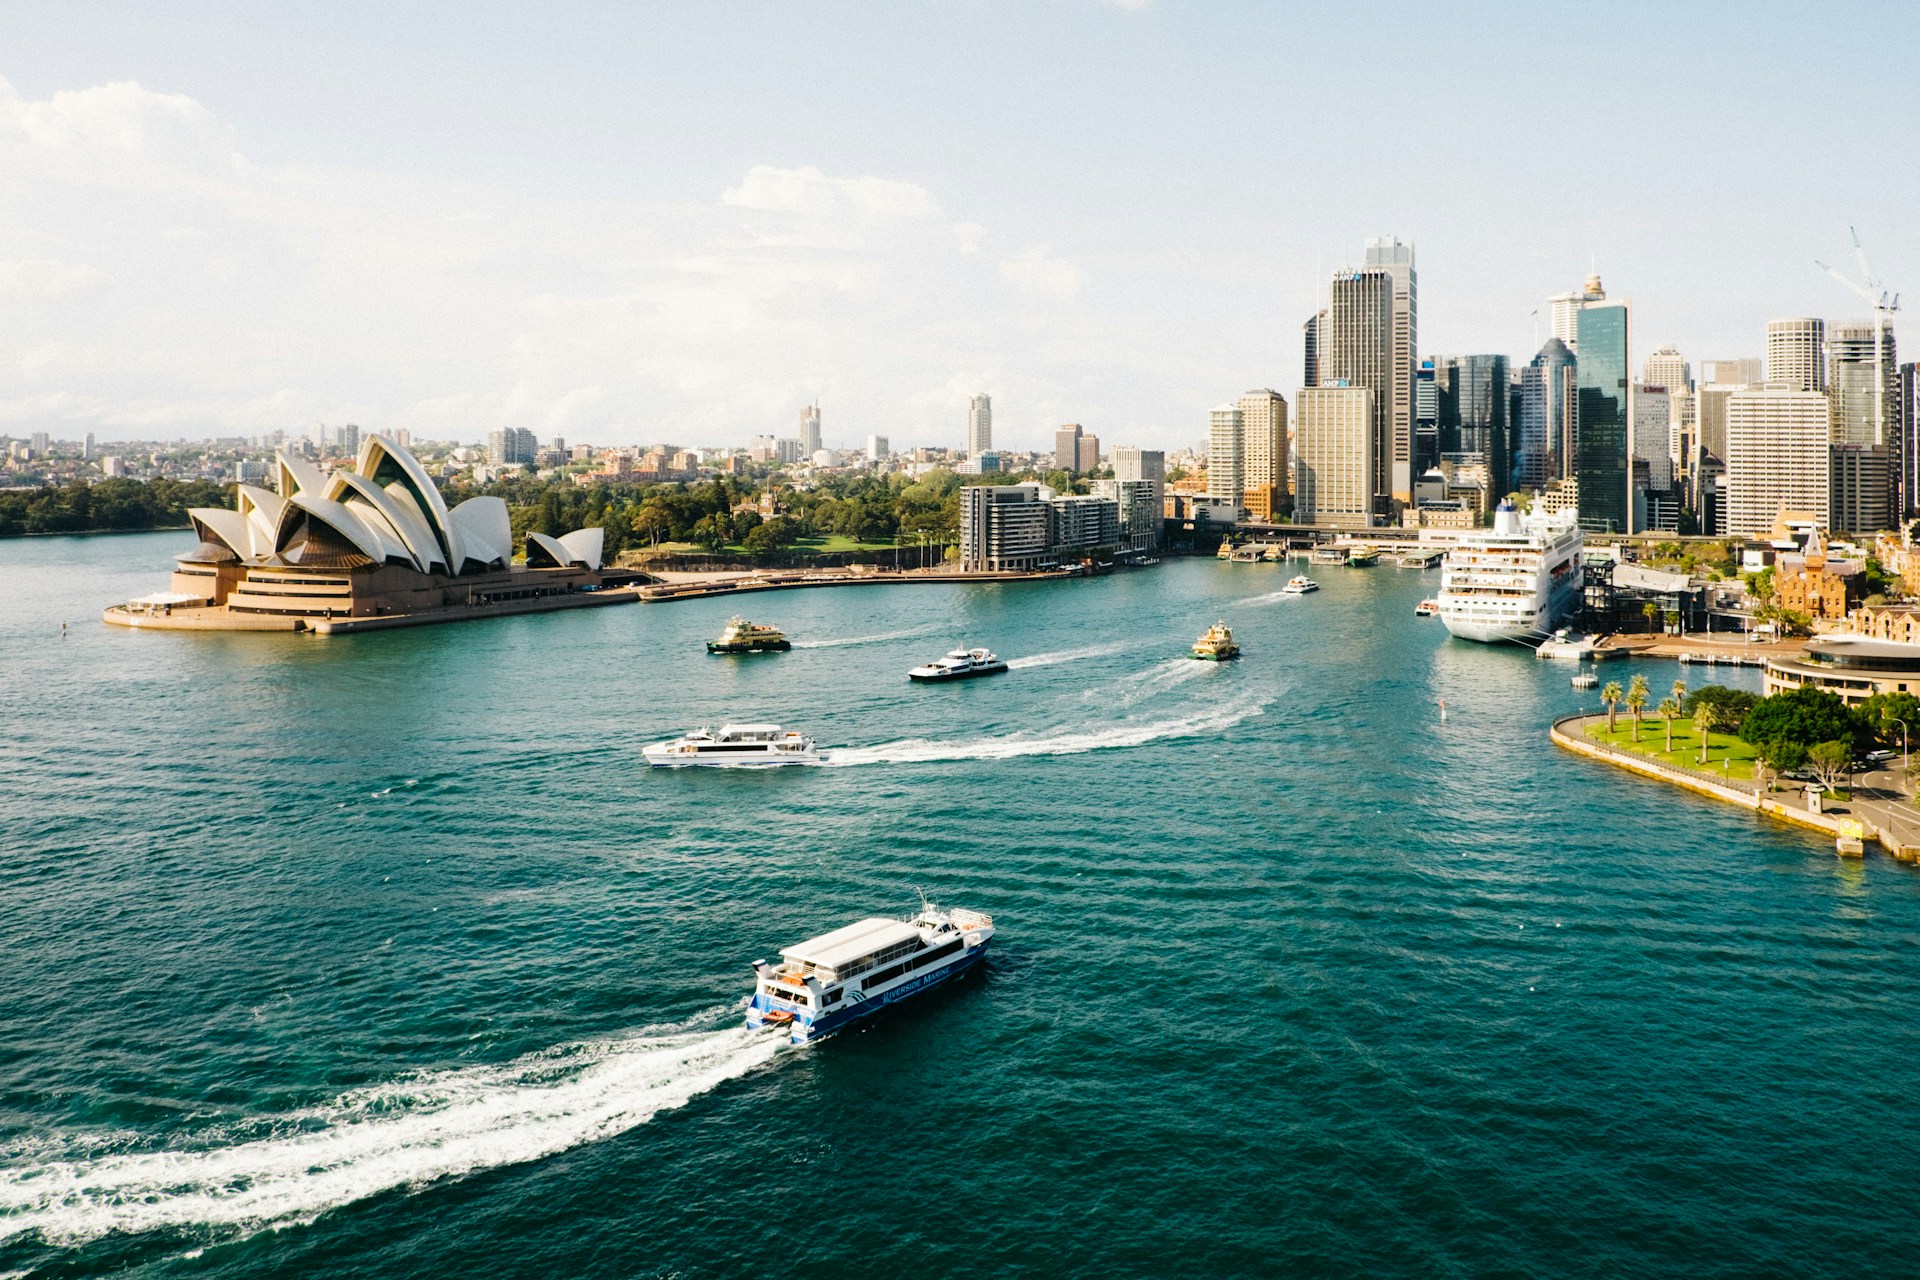 <p>Sydney's is home to a few iconic landmarks such as the Sydney Opera House and Harbour Bridge. However, it’s their stunning beaches, distinctive wildlife, and outdoor activities that attract most tourists.</p>